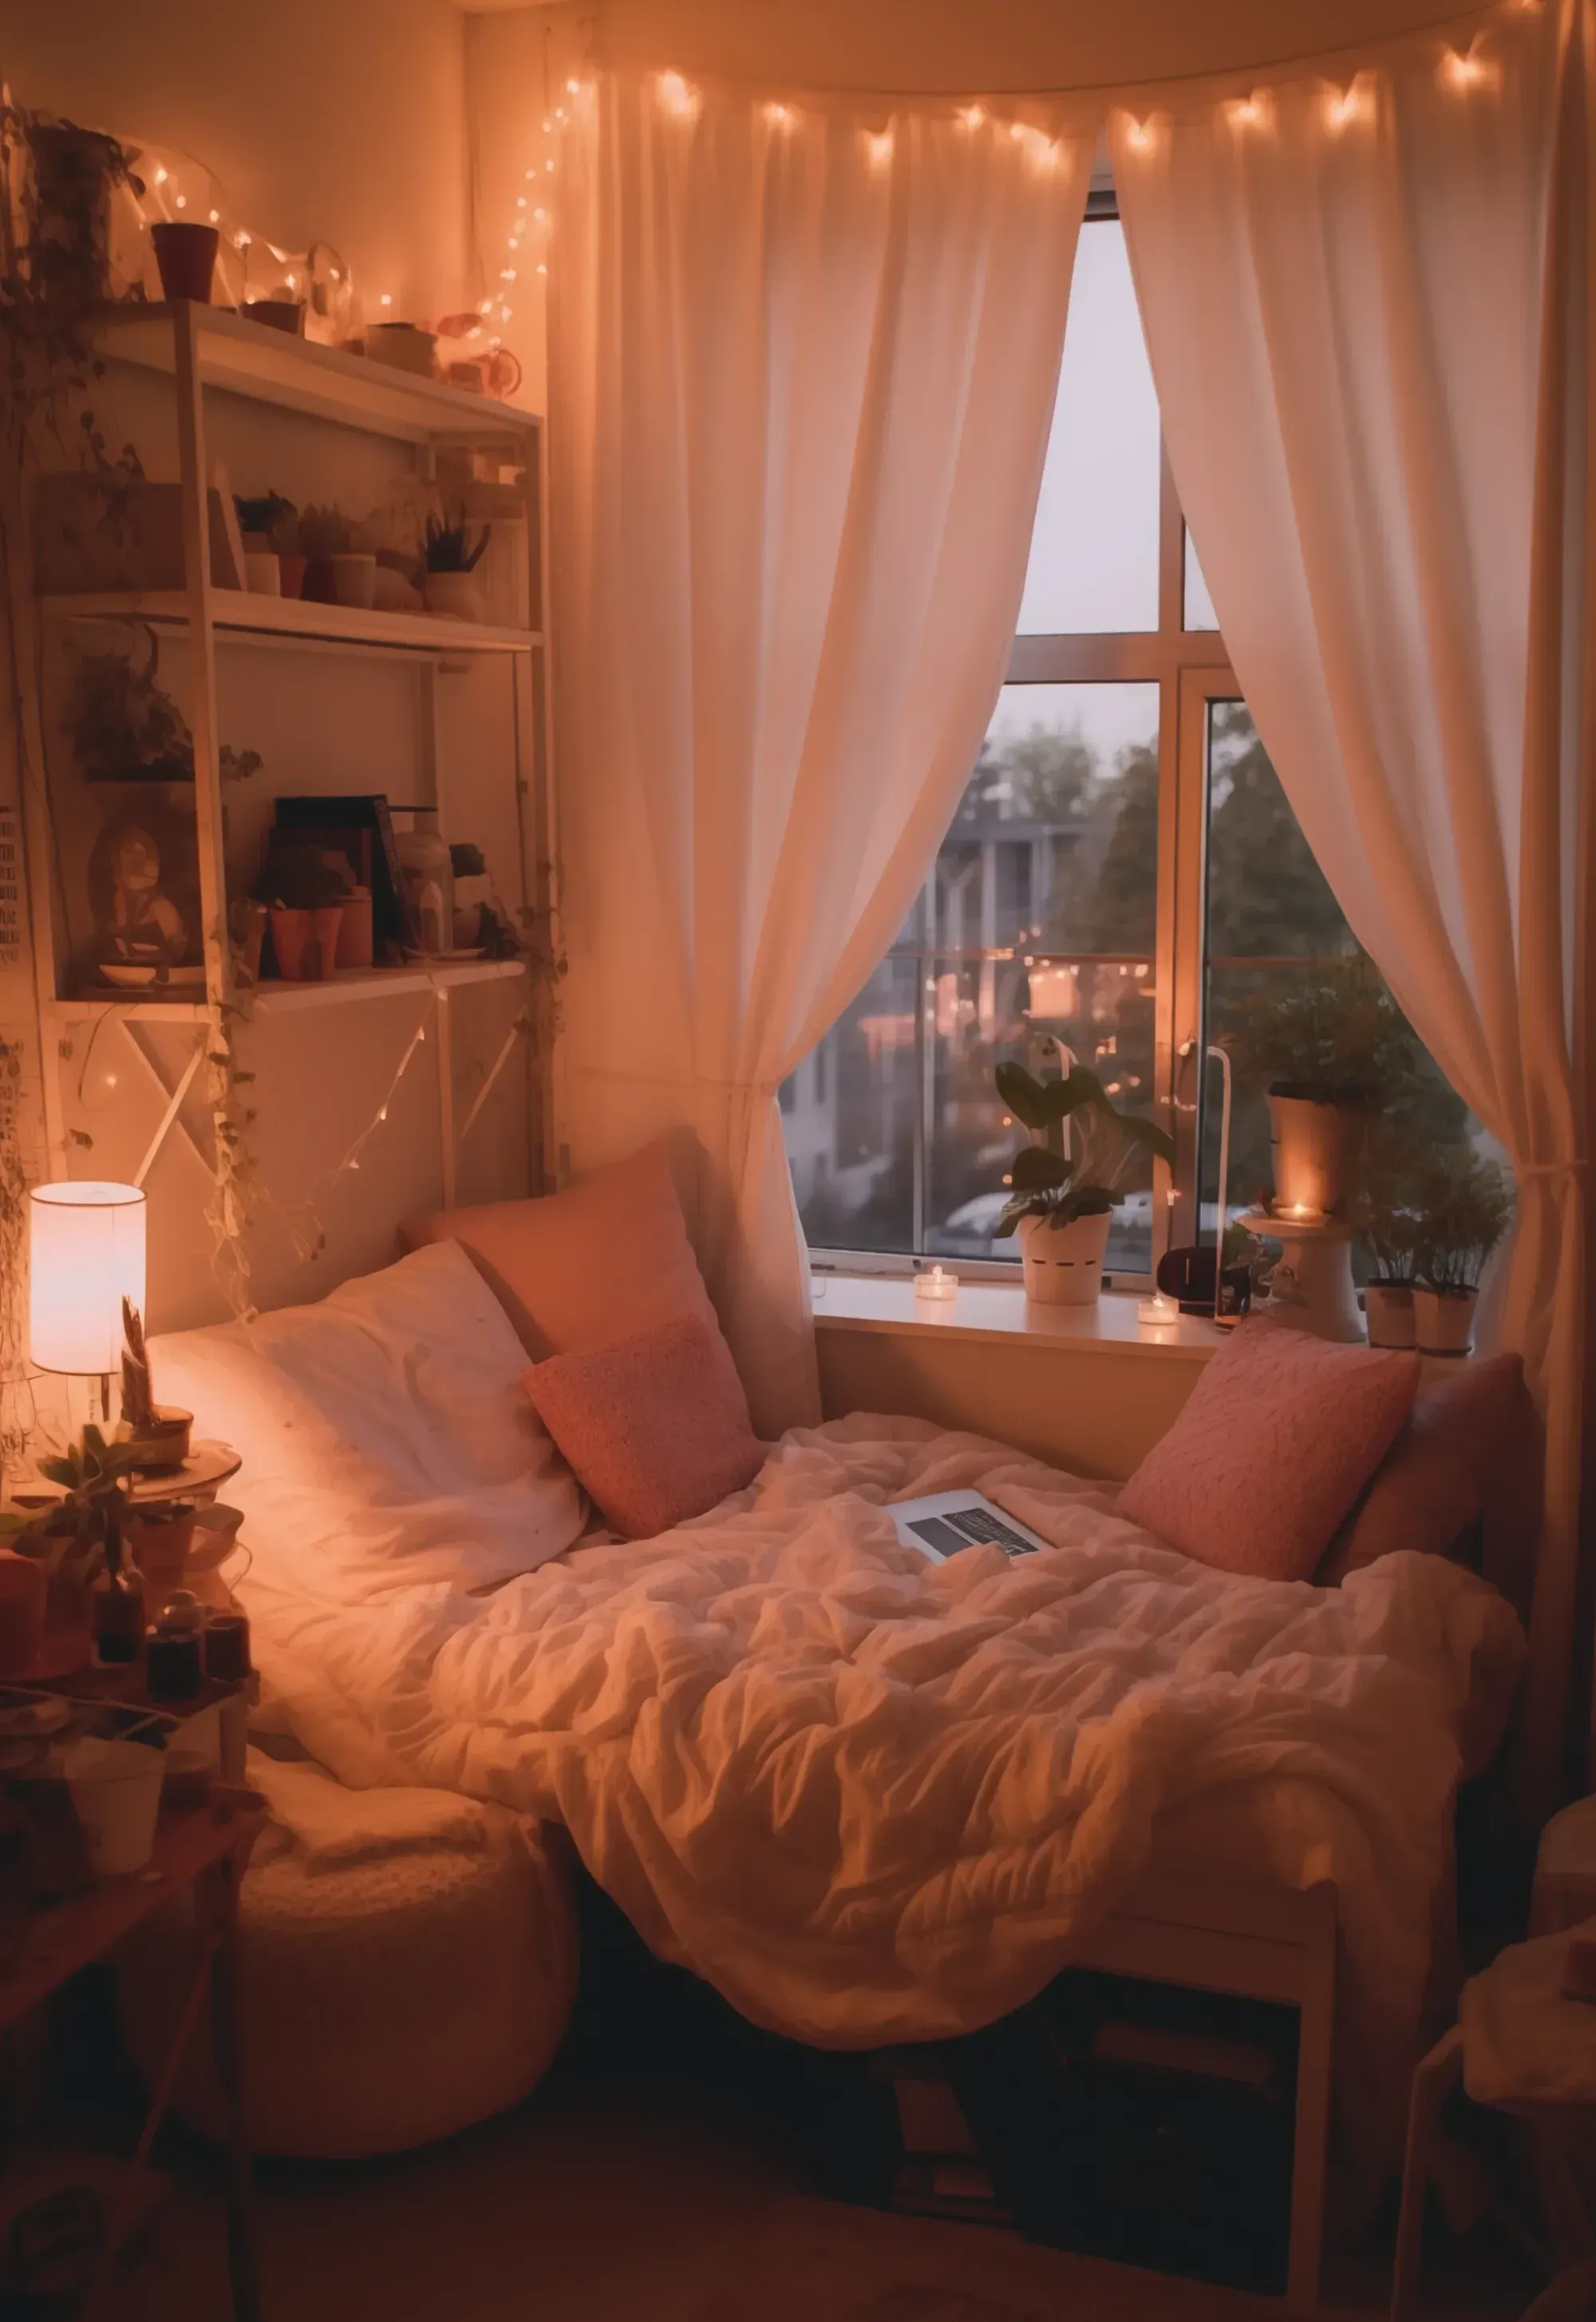 A bedframe with fairy lights